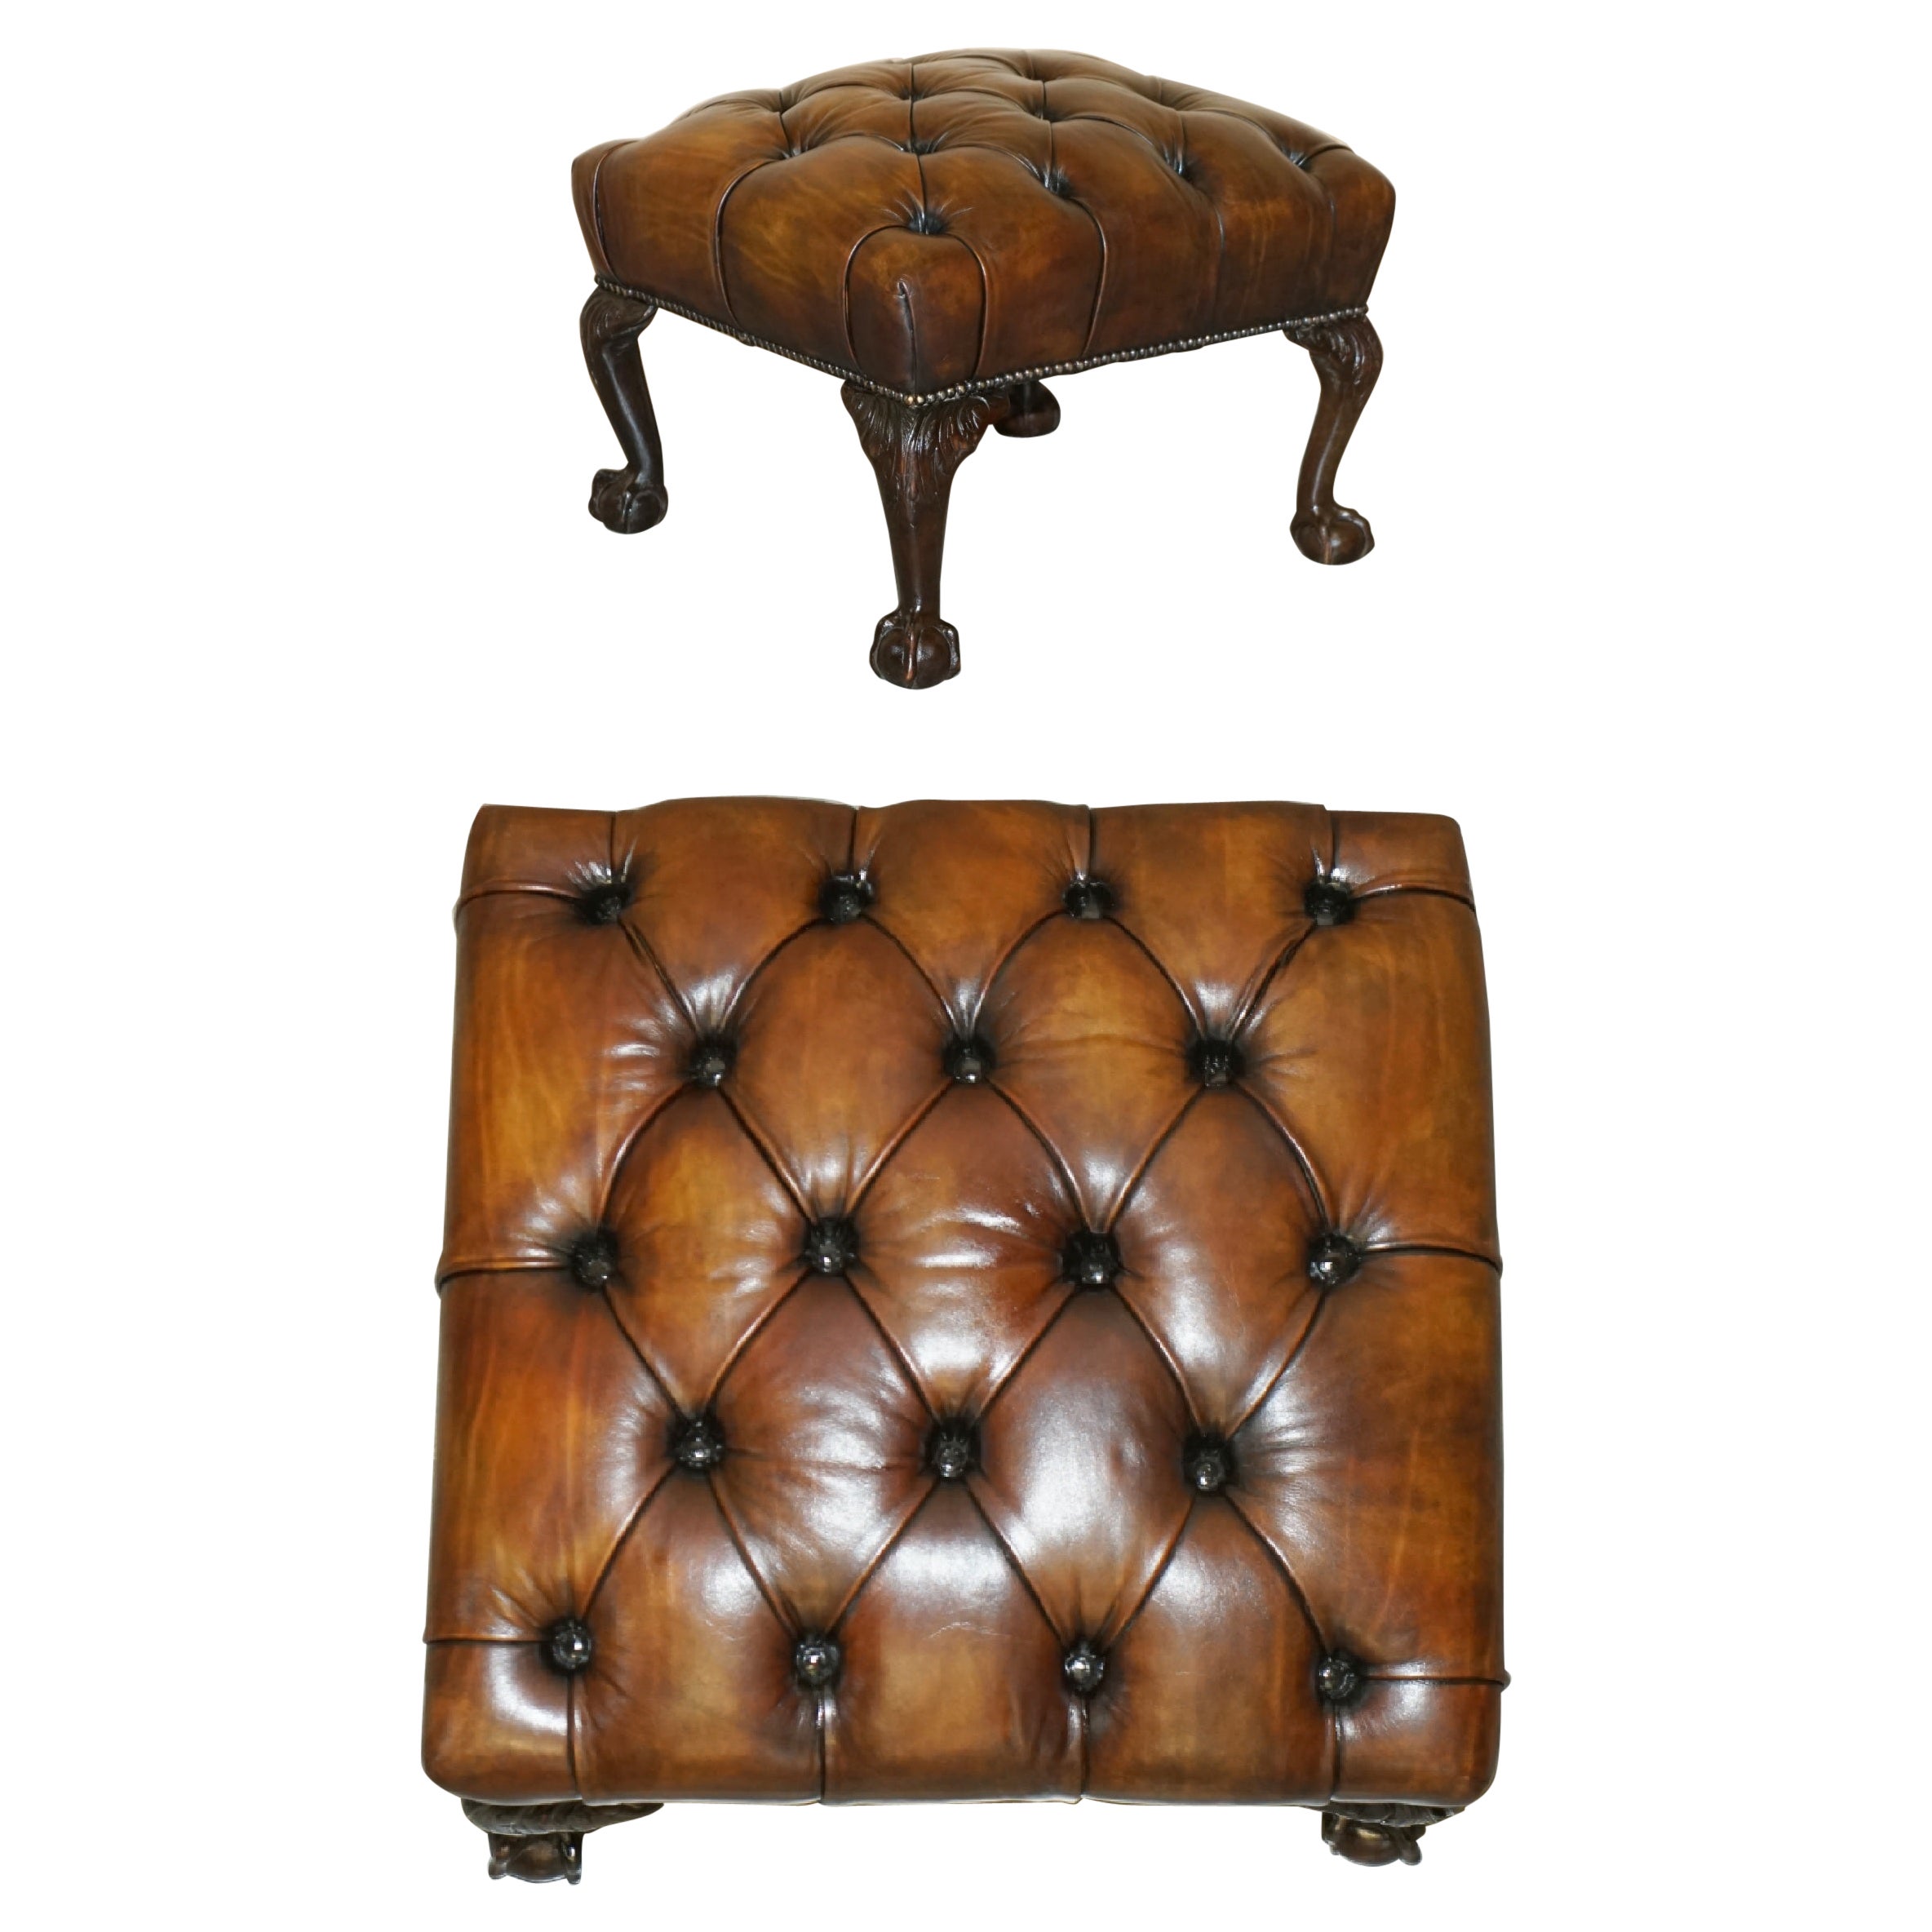 FINE ANTIQUITÉE FESTERFIELD FOOTSTOOL ViCTORIAN CLAW & BALL BROWN LEATHER ResTORED